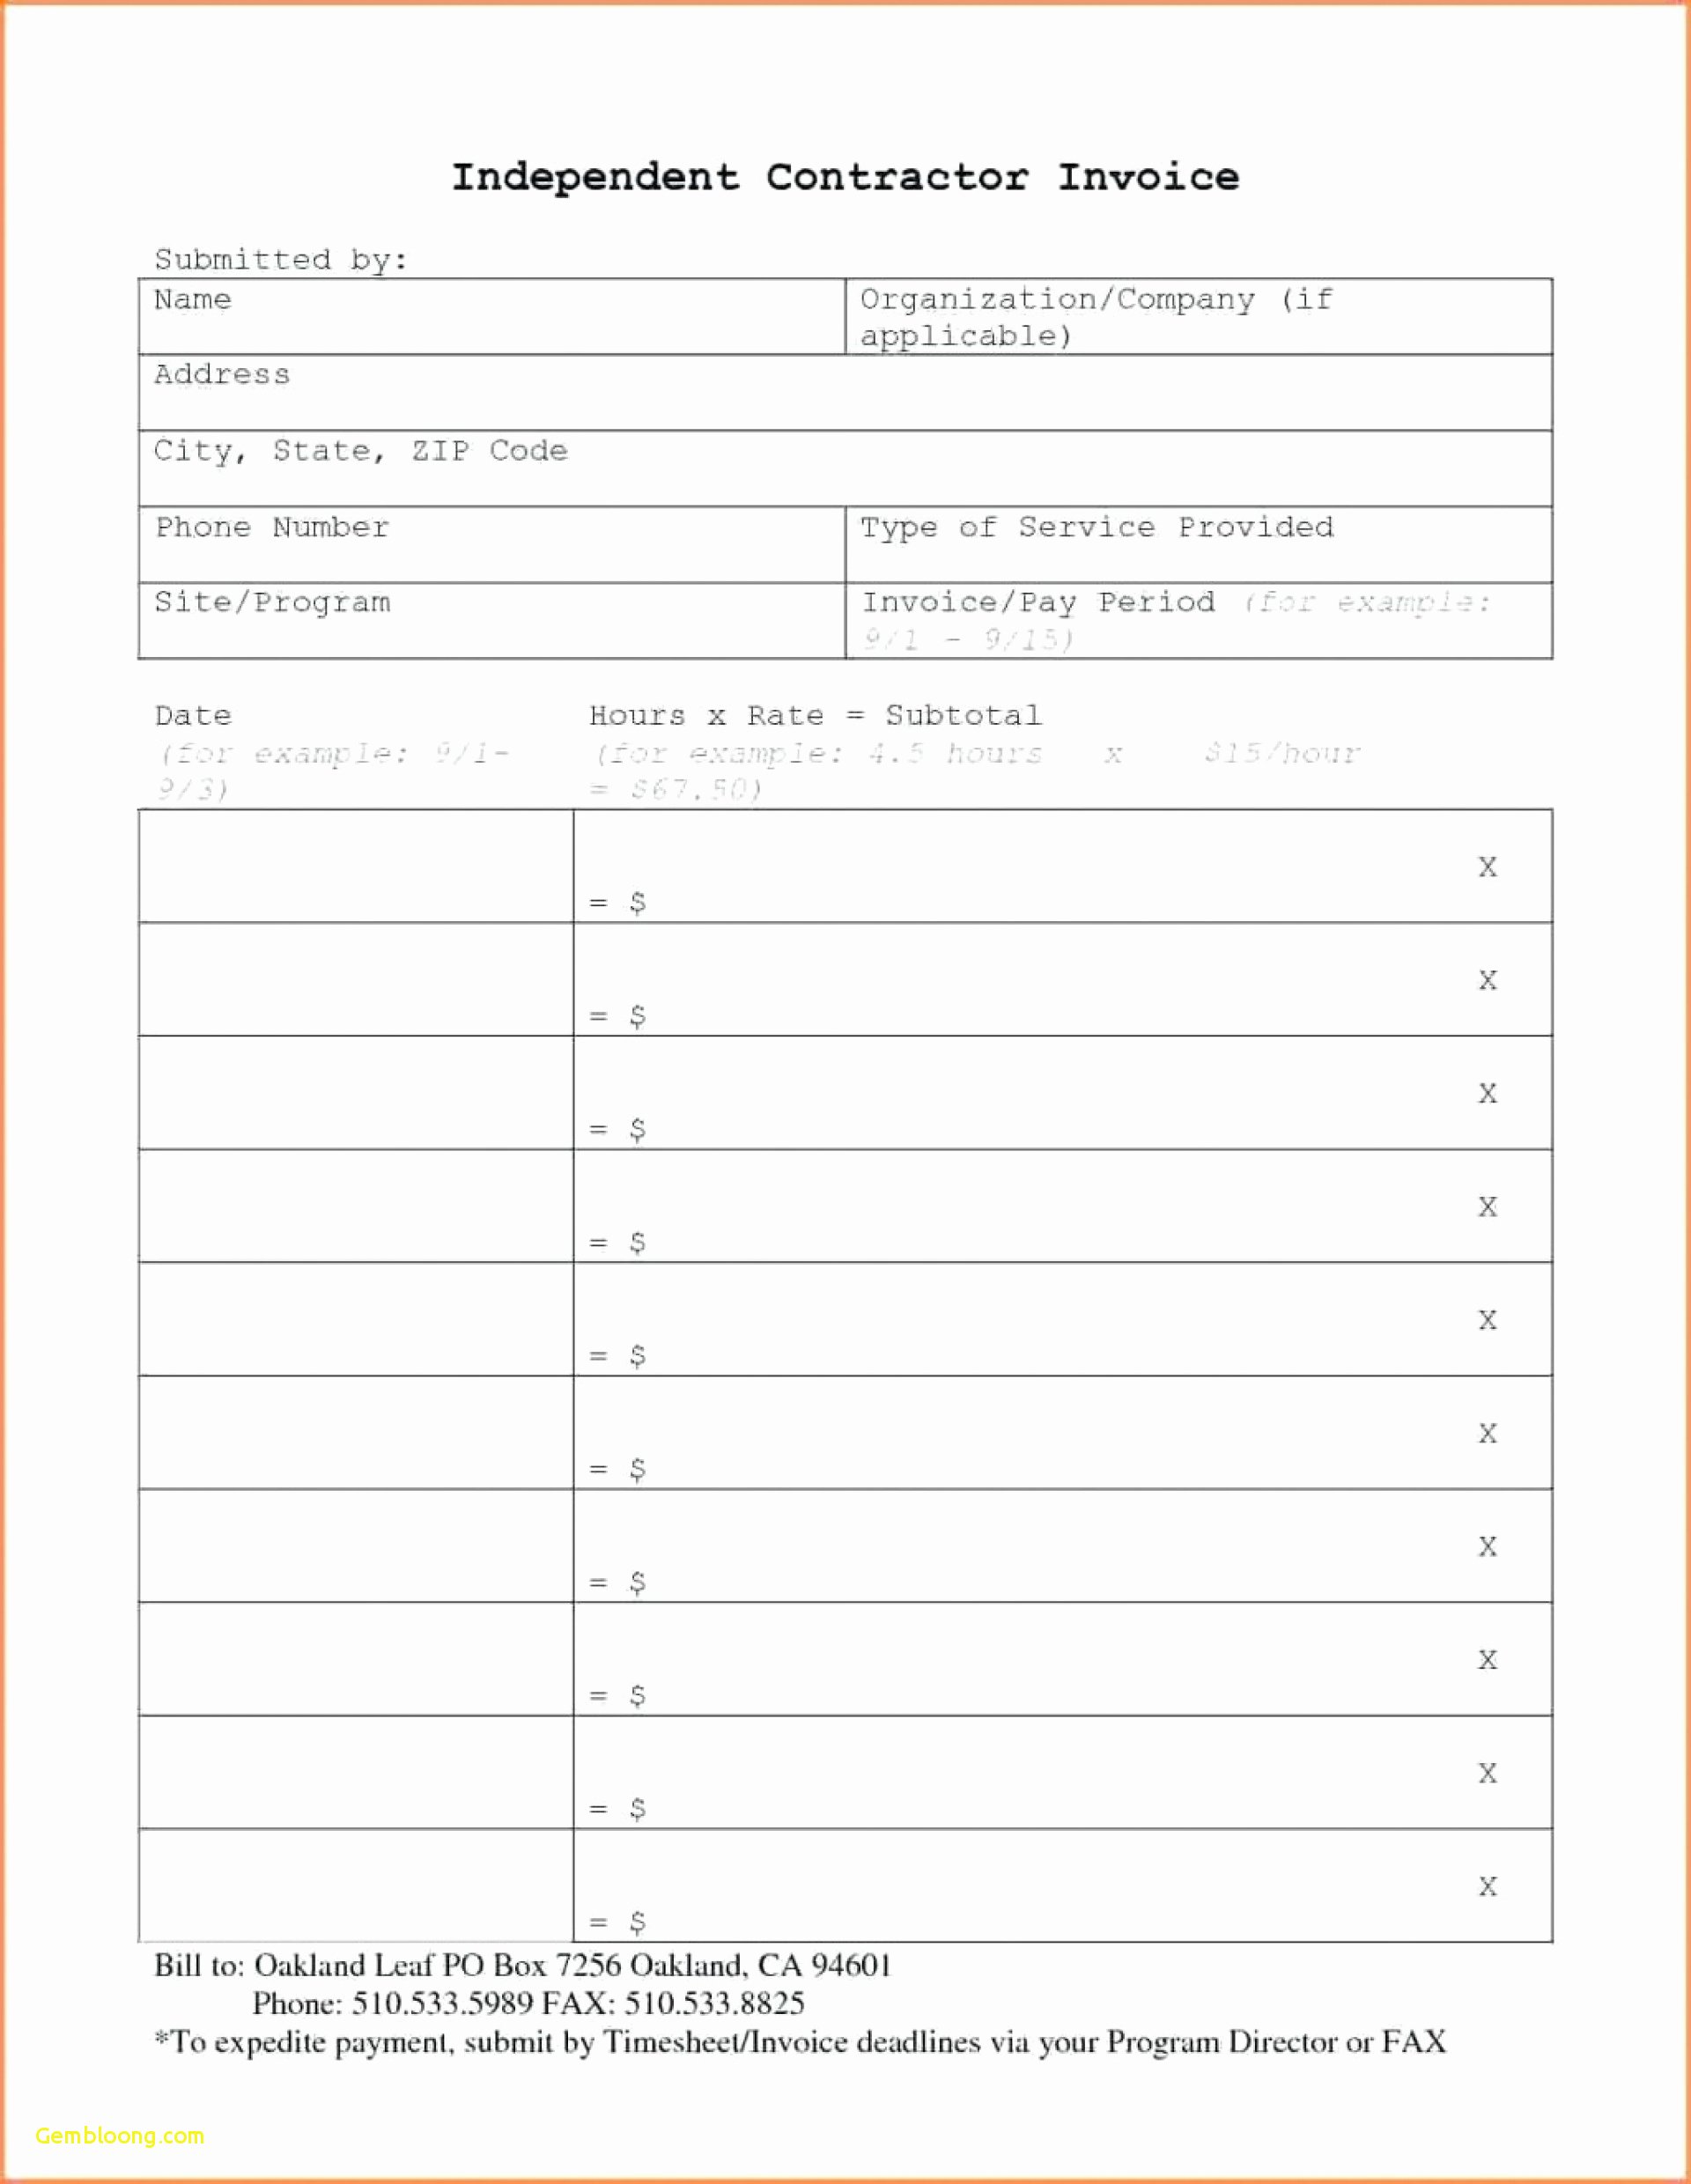 Independent Contractor Invoice Template Fresh Elegant Independent Contractor Invoice Template